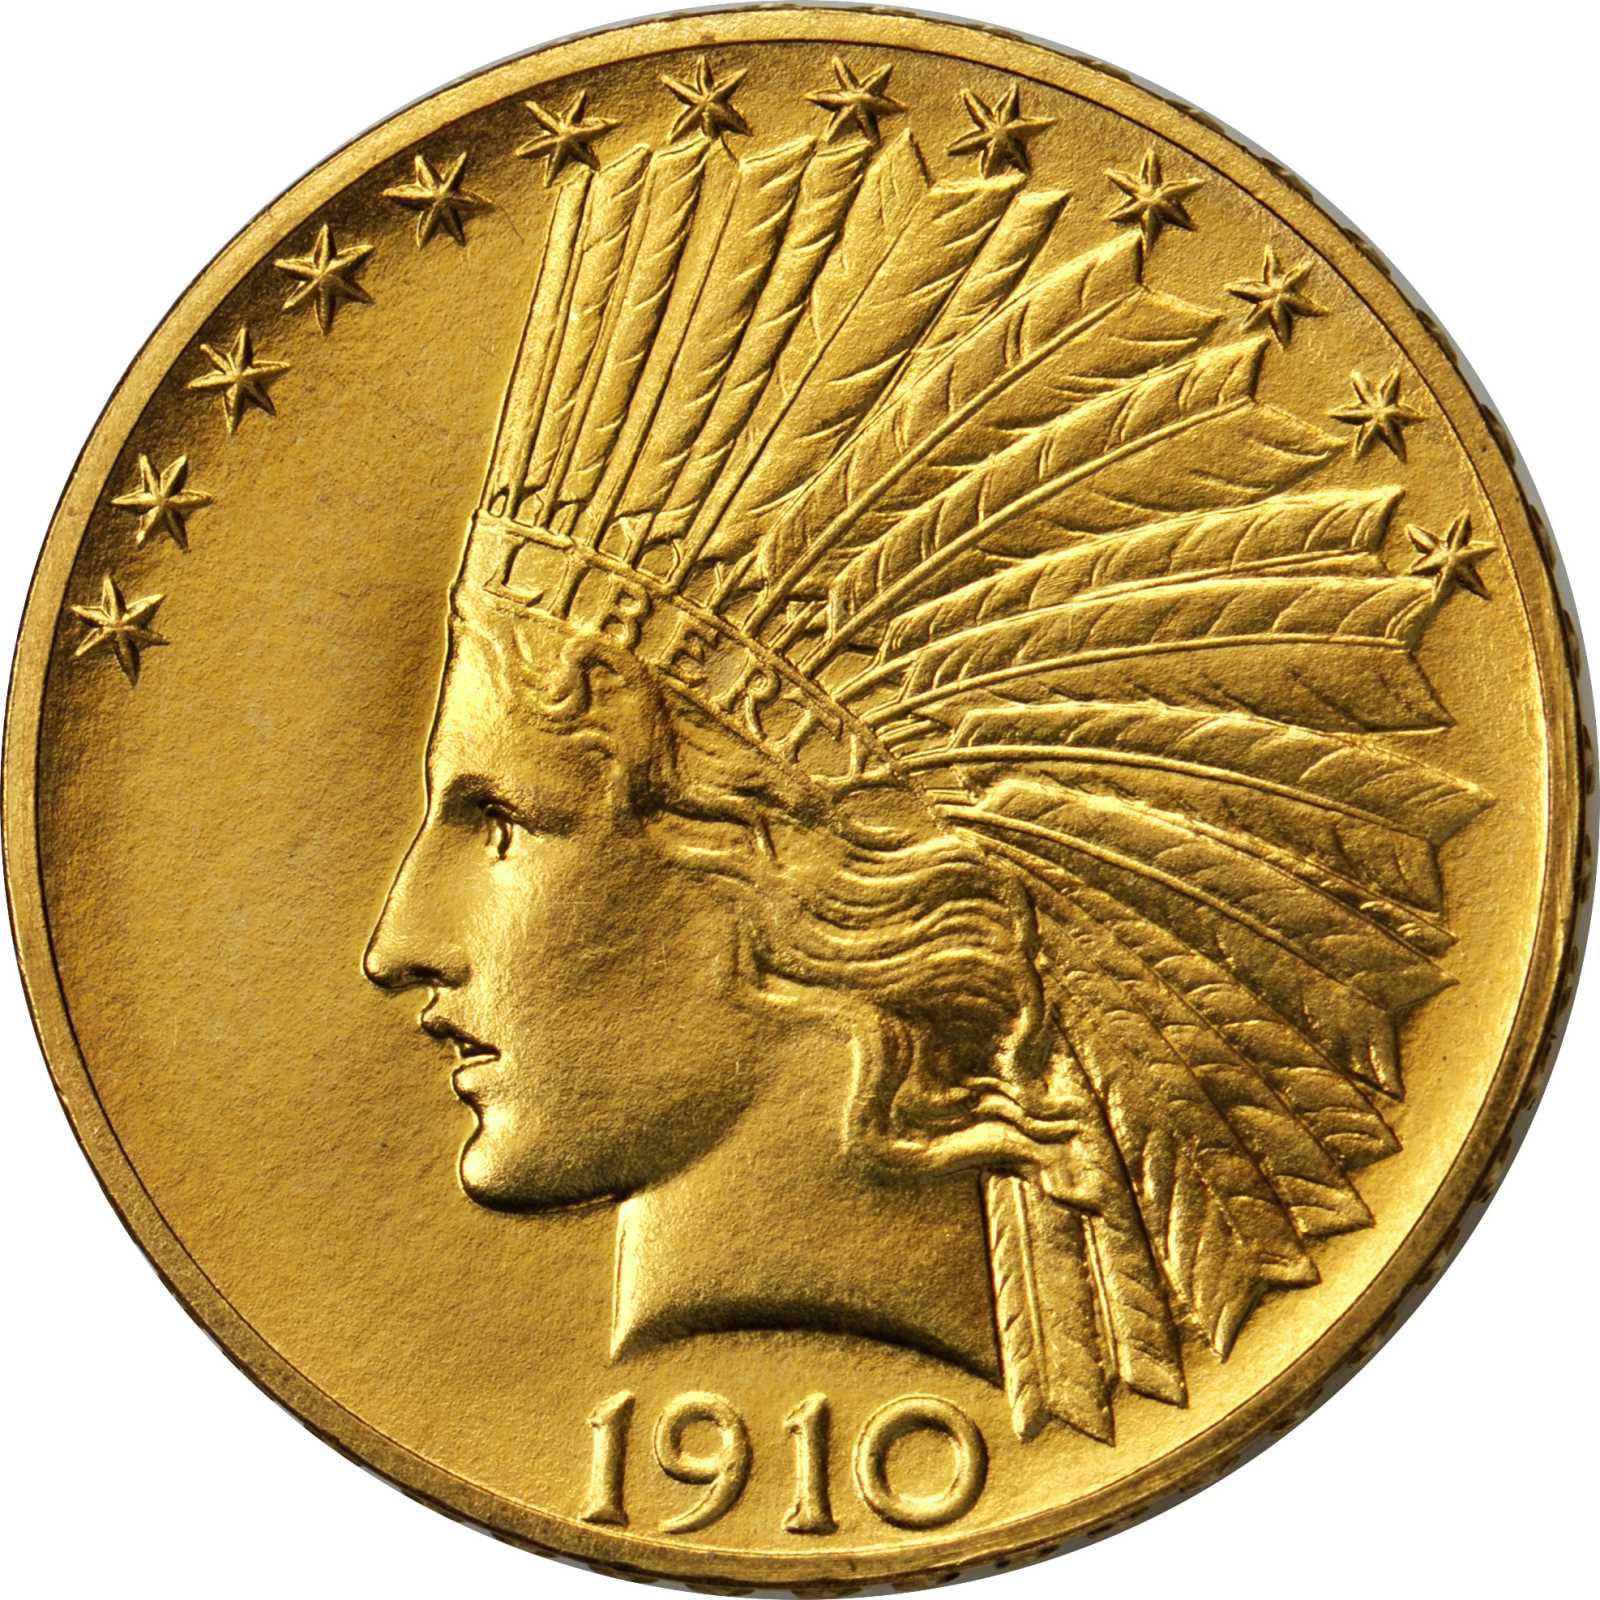 Value of 1910 Indian Head $10 Gold | Sell Your Rare Coins!